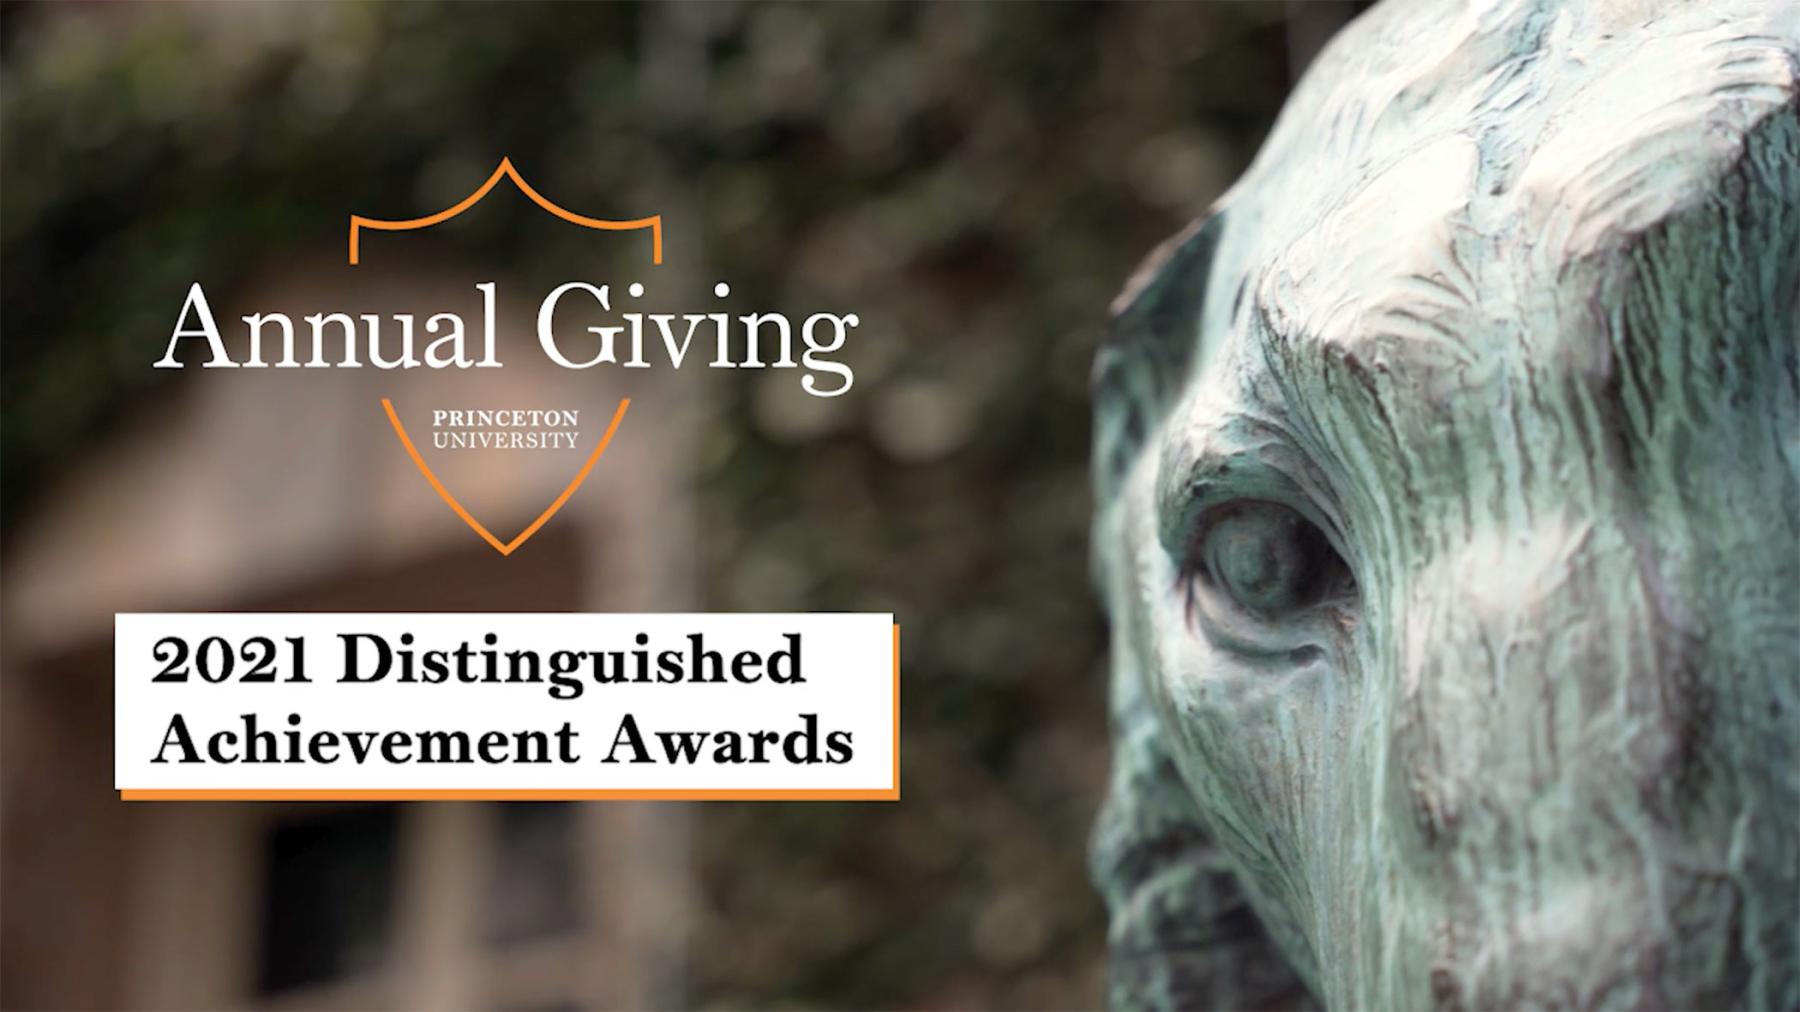 Annual Giving Achievement Awards